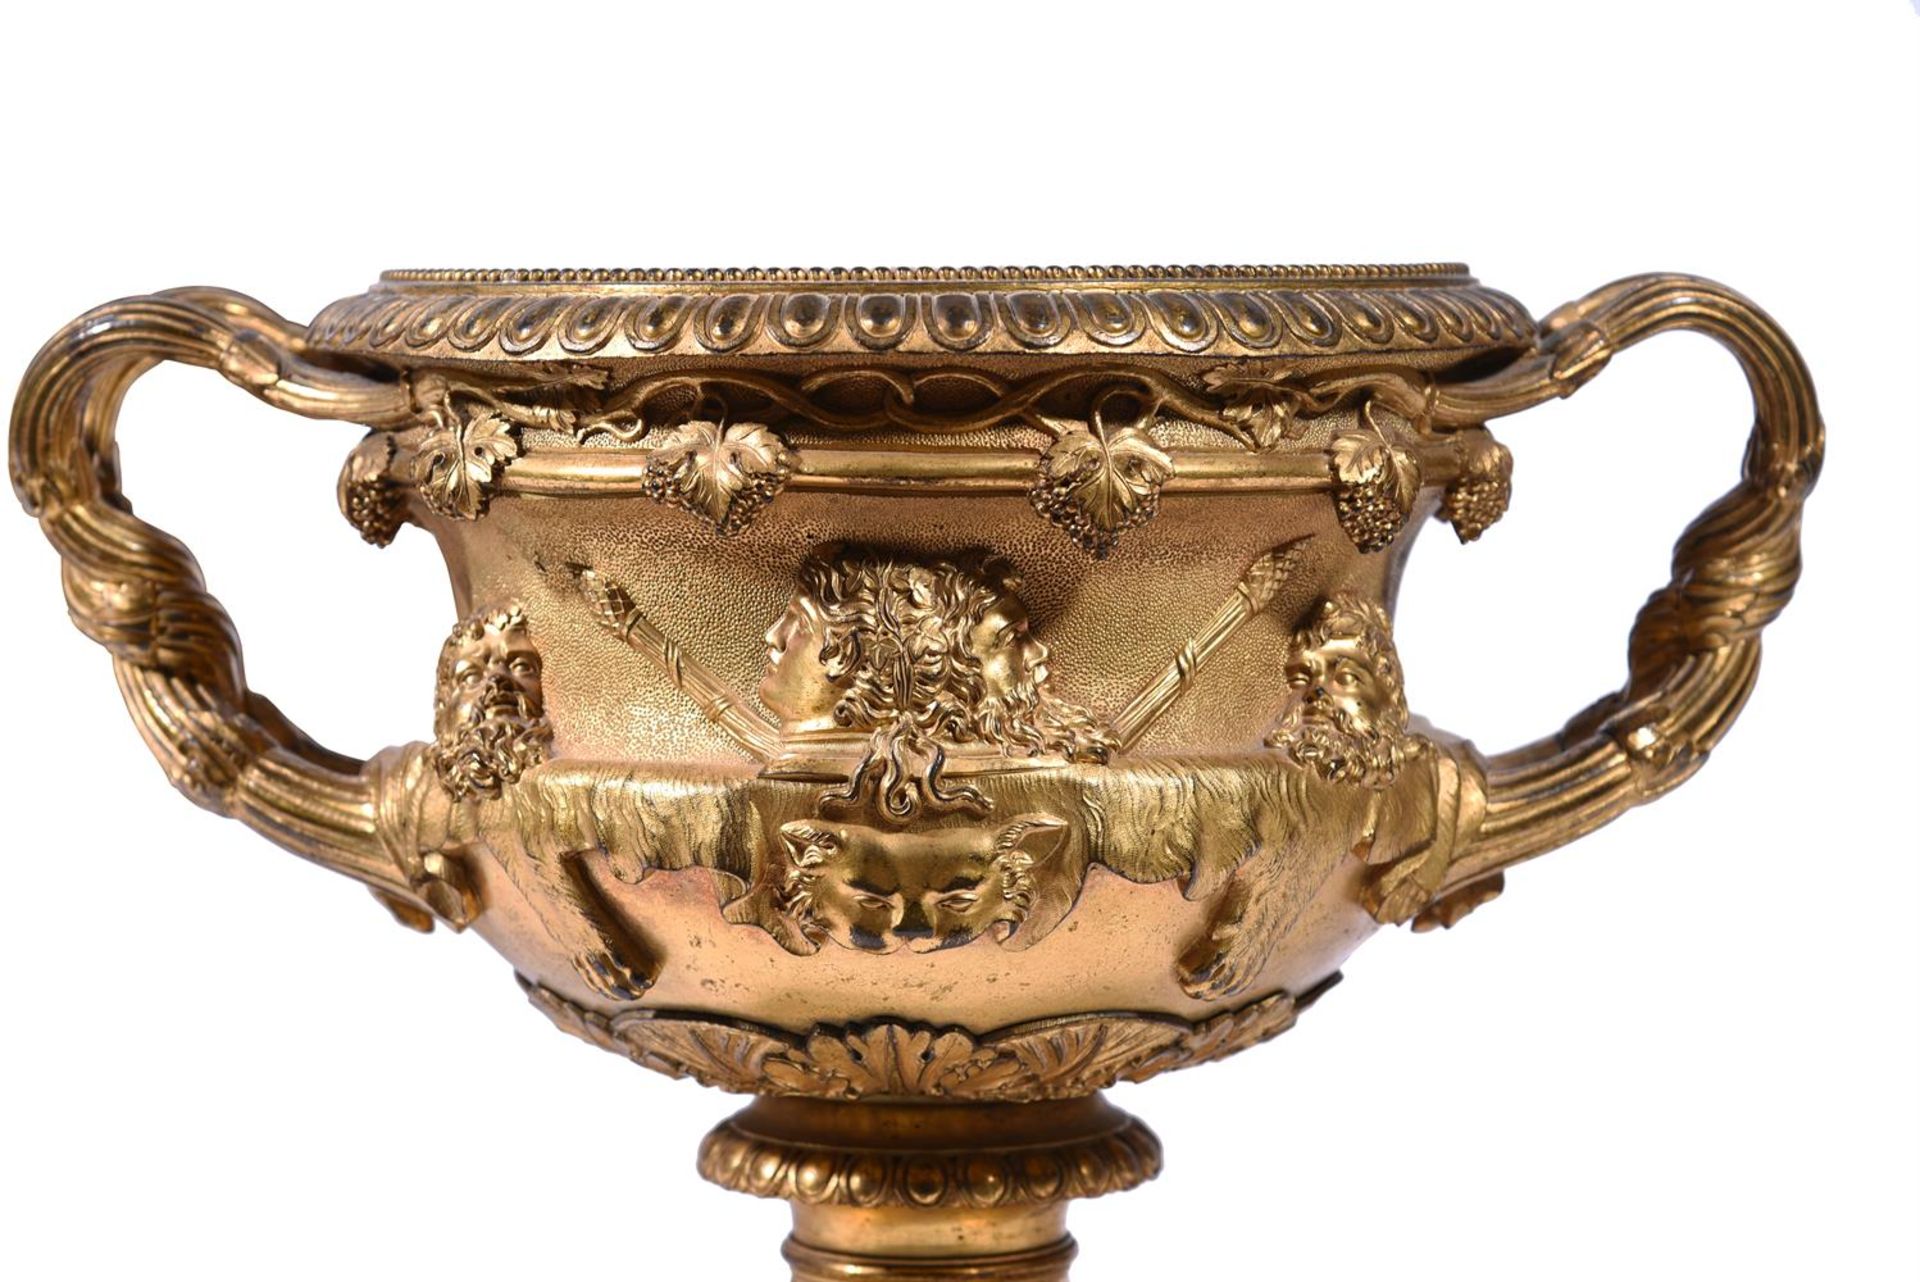 AFTER THE ANTIQUE, A PAIR OF REGENCY ORMOLU WARWICK VASES, EARLY 19TH CENTURY - Image 3 of 4